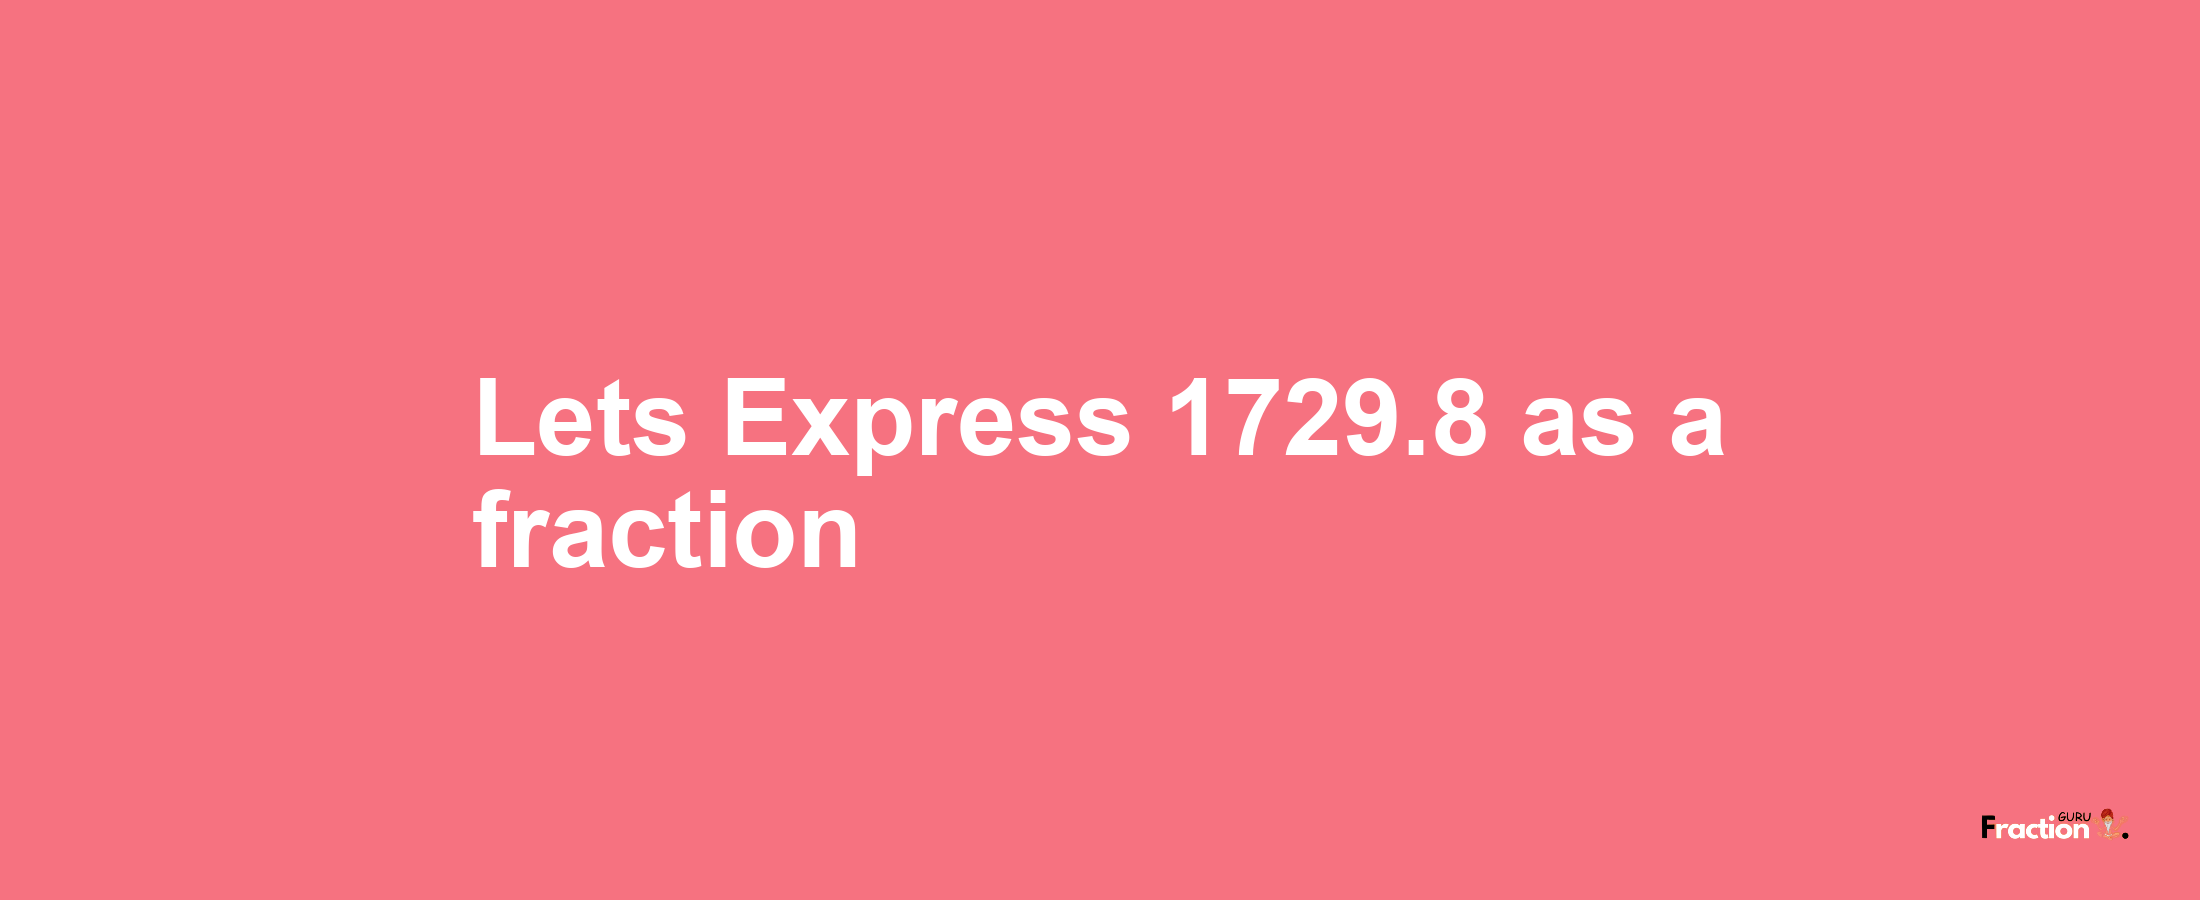 Lets Express 1729.8 as afraction